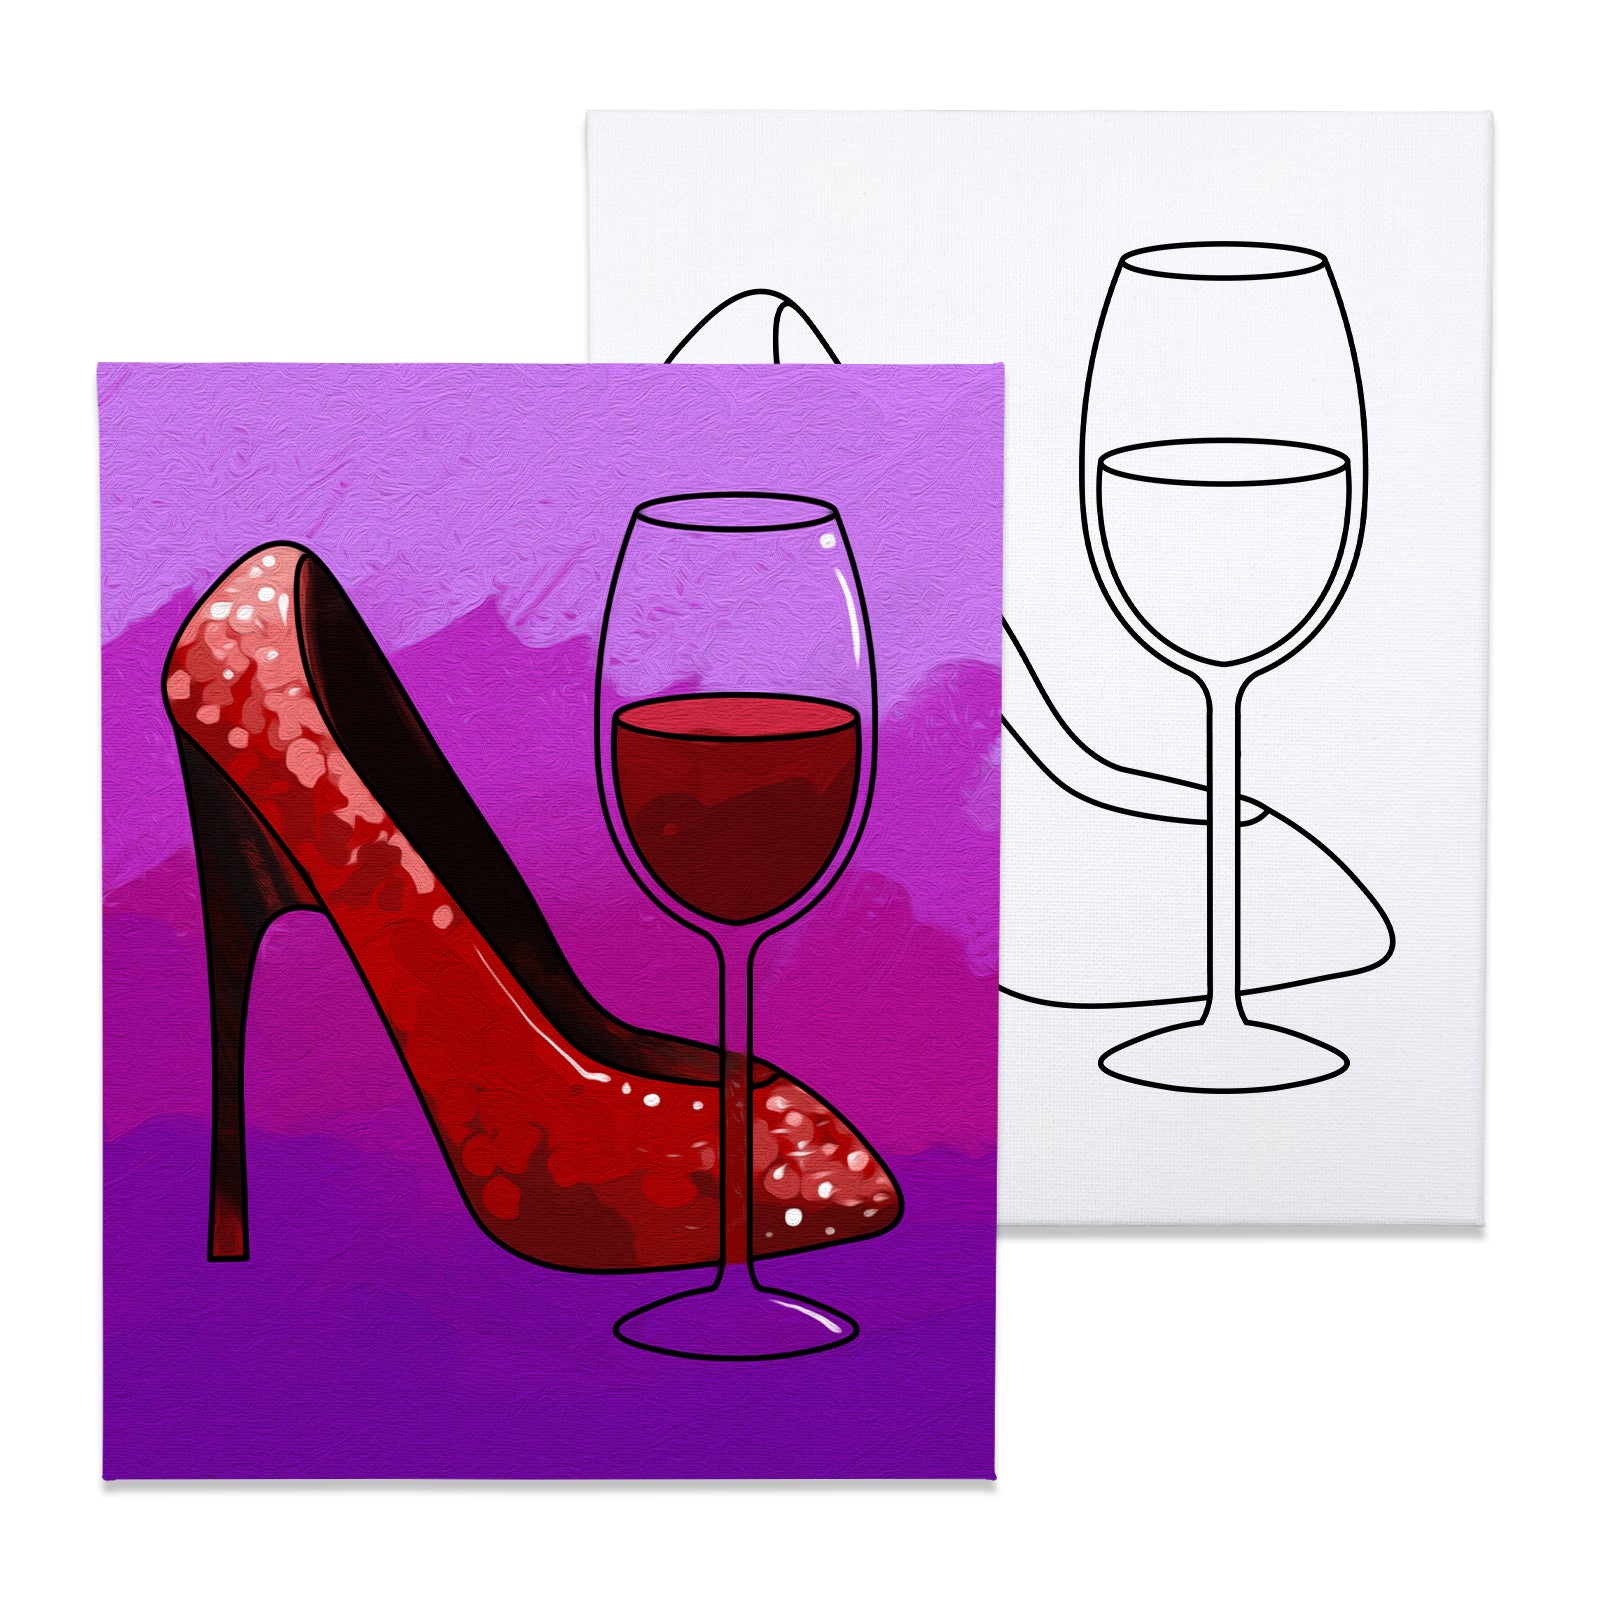 VOCHIC Canvas Painting Kit Pre Drawn Canvas for Painting for Adults Party  Kits Paint and Sip Party Supplies 8x10 Canvas to Paint Girl High Heels  Glass